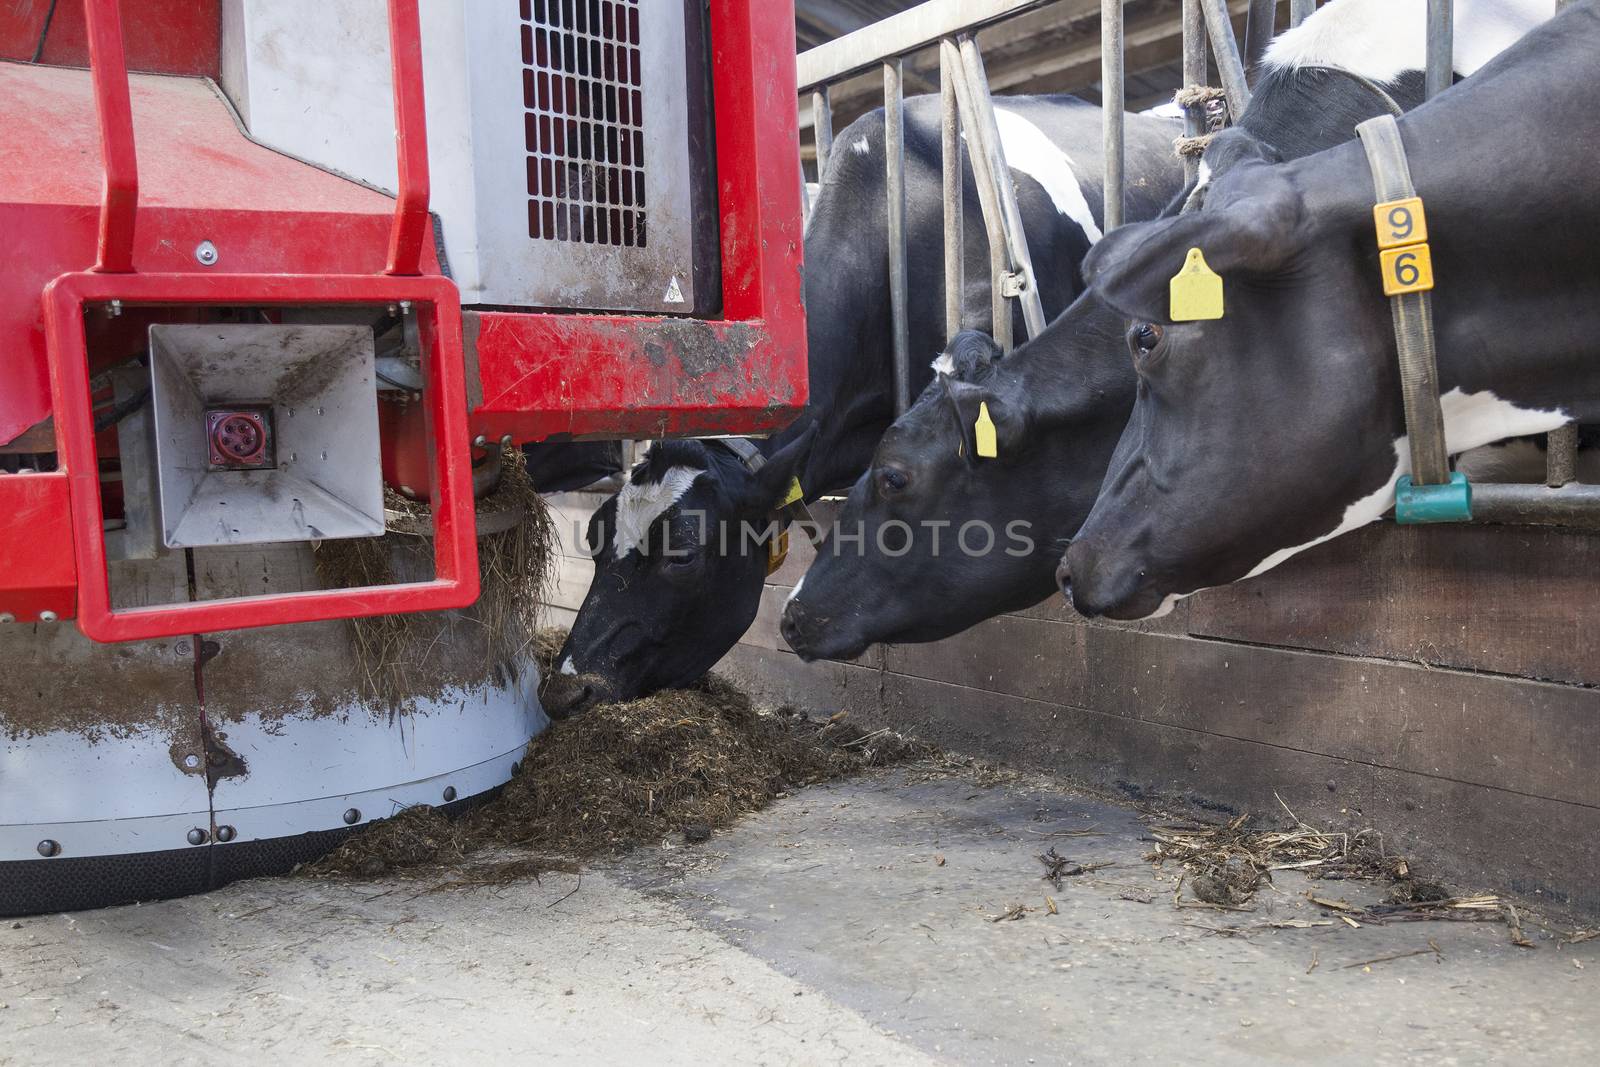 black and white cows in stable reach for food from red feeding robot